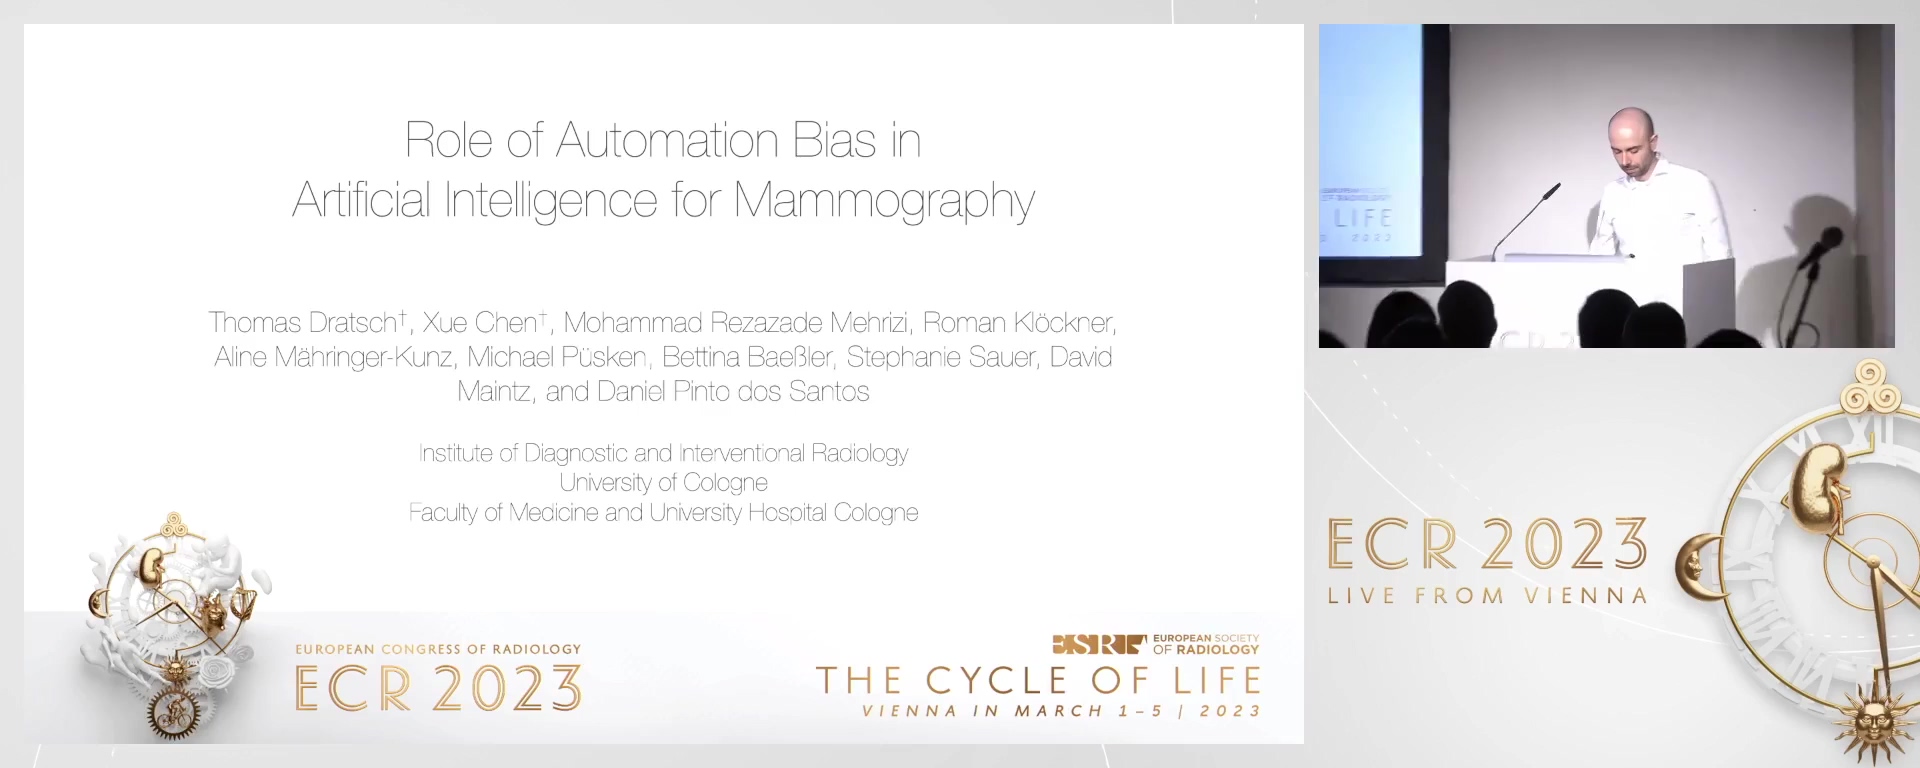 Role of automation bias in artificial intelligence for mammography - Thomas Markus Dratsch, Cologne / DE